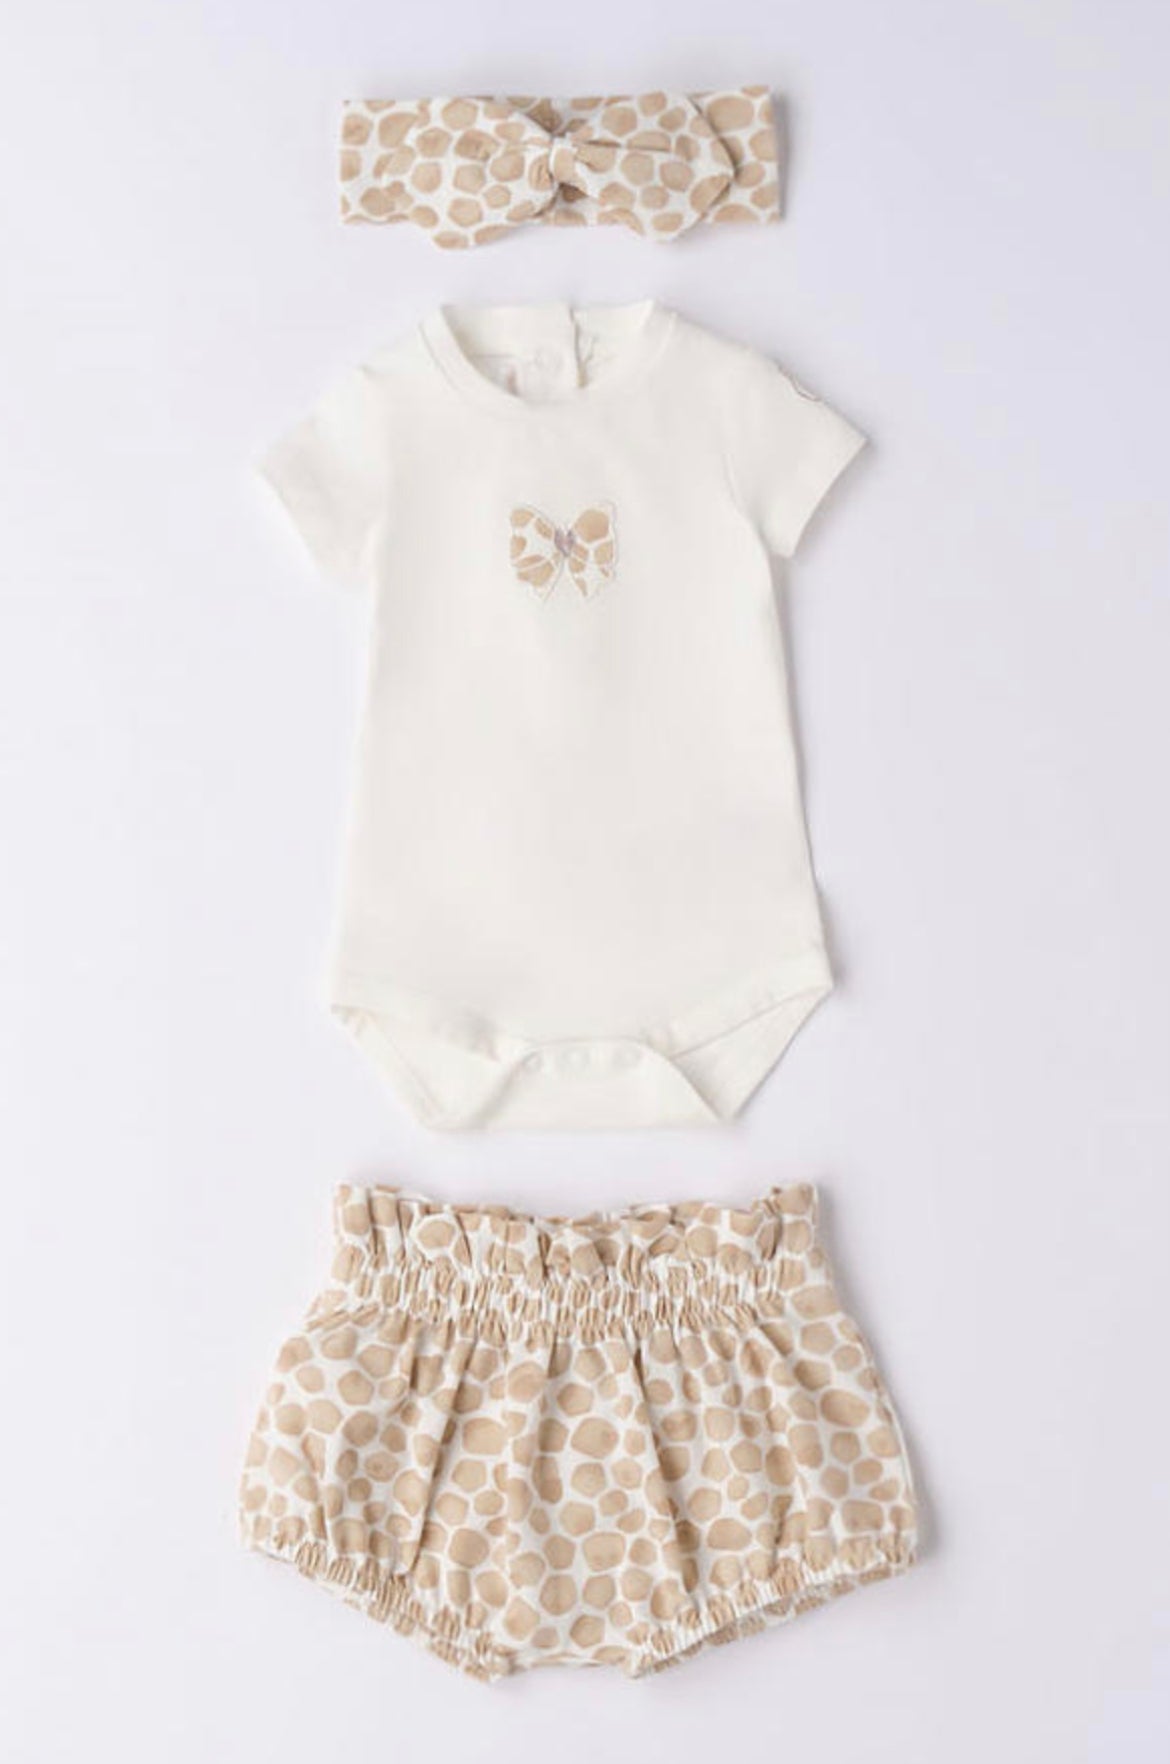 Minibanda Baby Girl Ivory & Tan 3 Piece Outfit